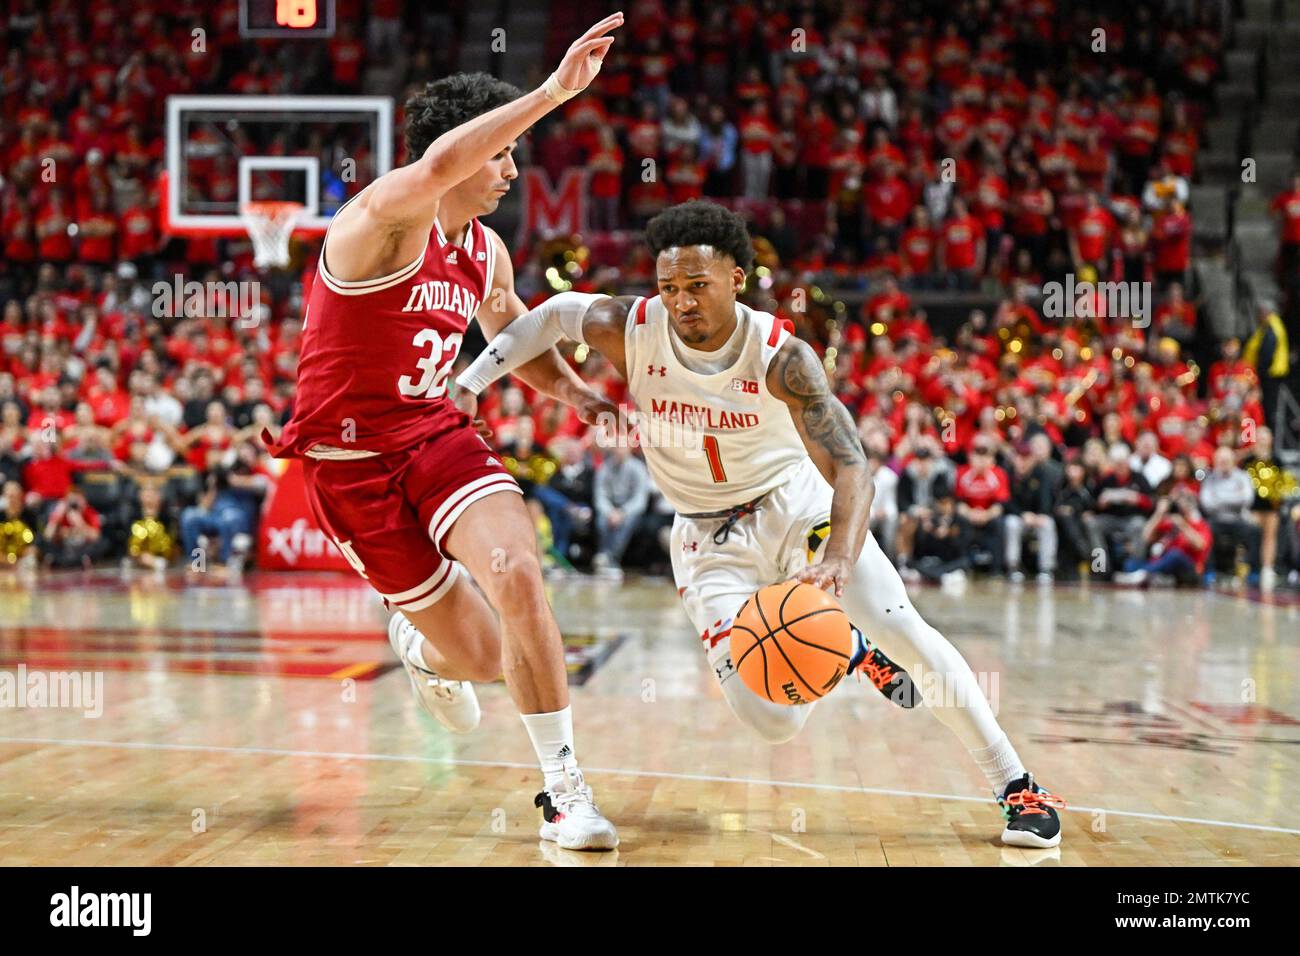 College Park, MD, USA. 31st Jan, 2023. Maryland Terrapins guard Jahmir Young (1) dribbles the ball past Indiana Hoosiers guard Trey Galloway (32) during the NCAA basketball game between the Indiana Hoosiers and the Maryland Terrapins at Xfinity Center in College Park, MD. Reggie Hildred/CSM/Alamy Live News Stock Photo